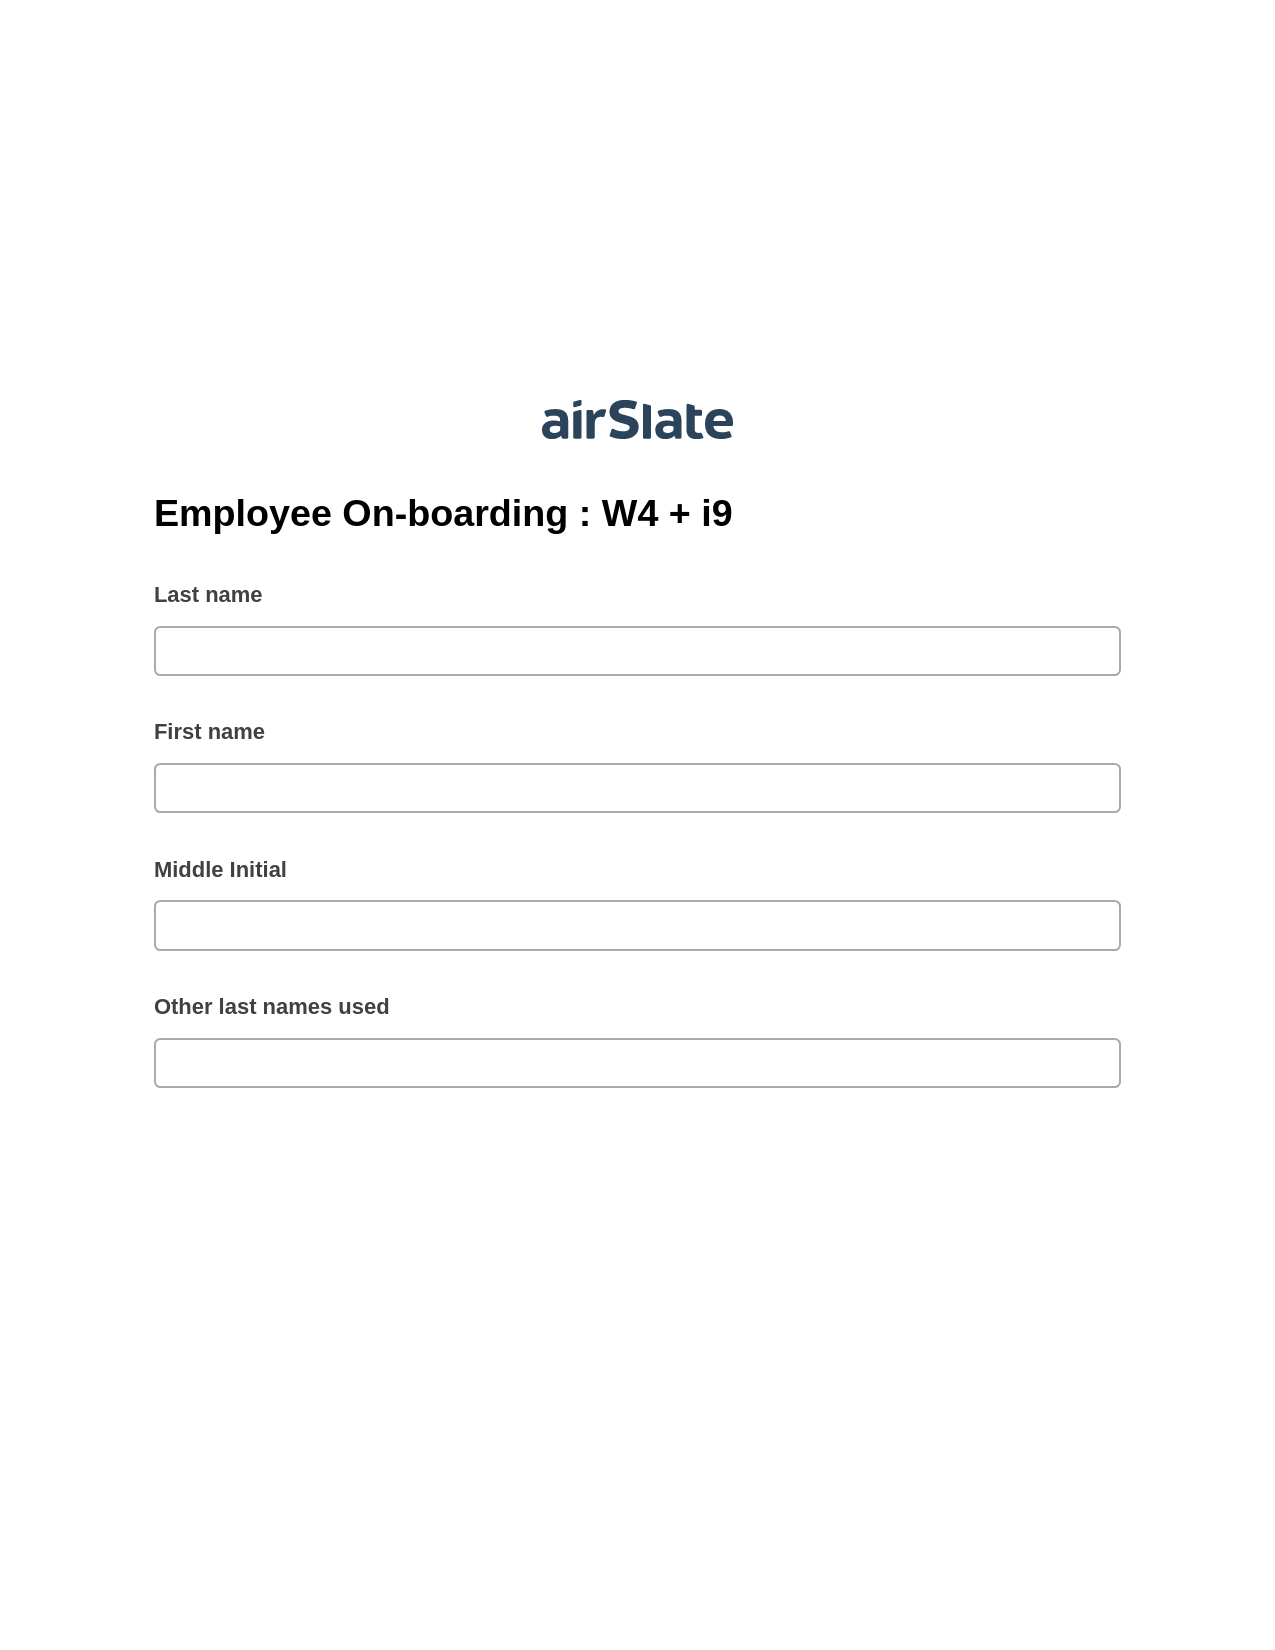 Employee On-boarding : W4 + i9 Pre-fill from another Slate Bot, Lock the Slate Bot, OneDrive Bot